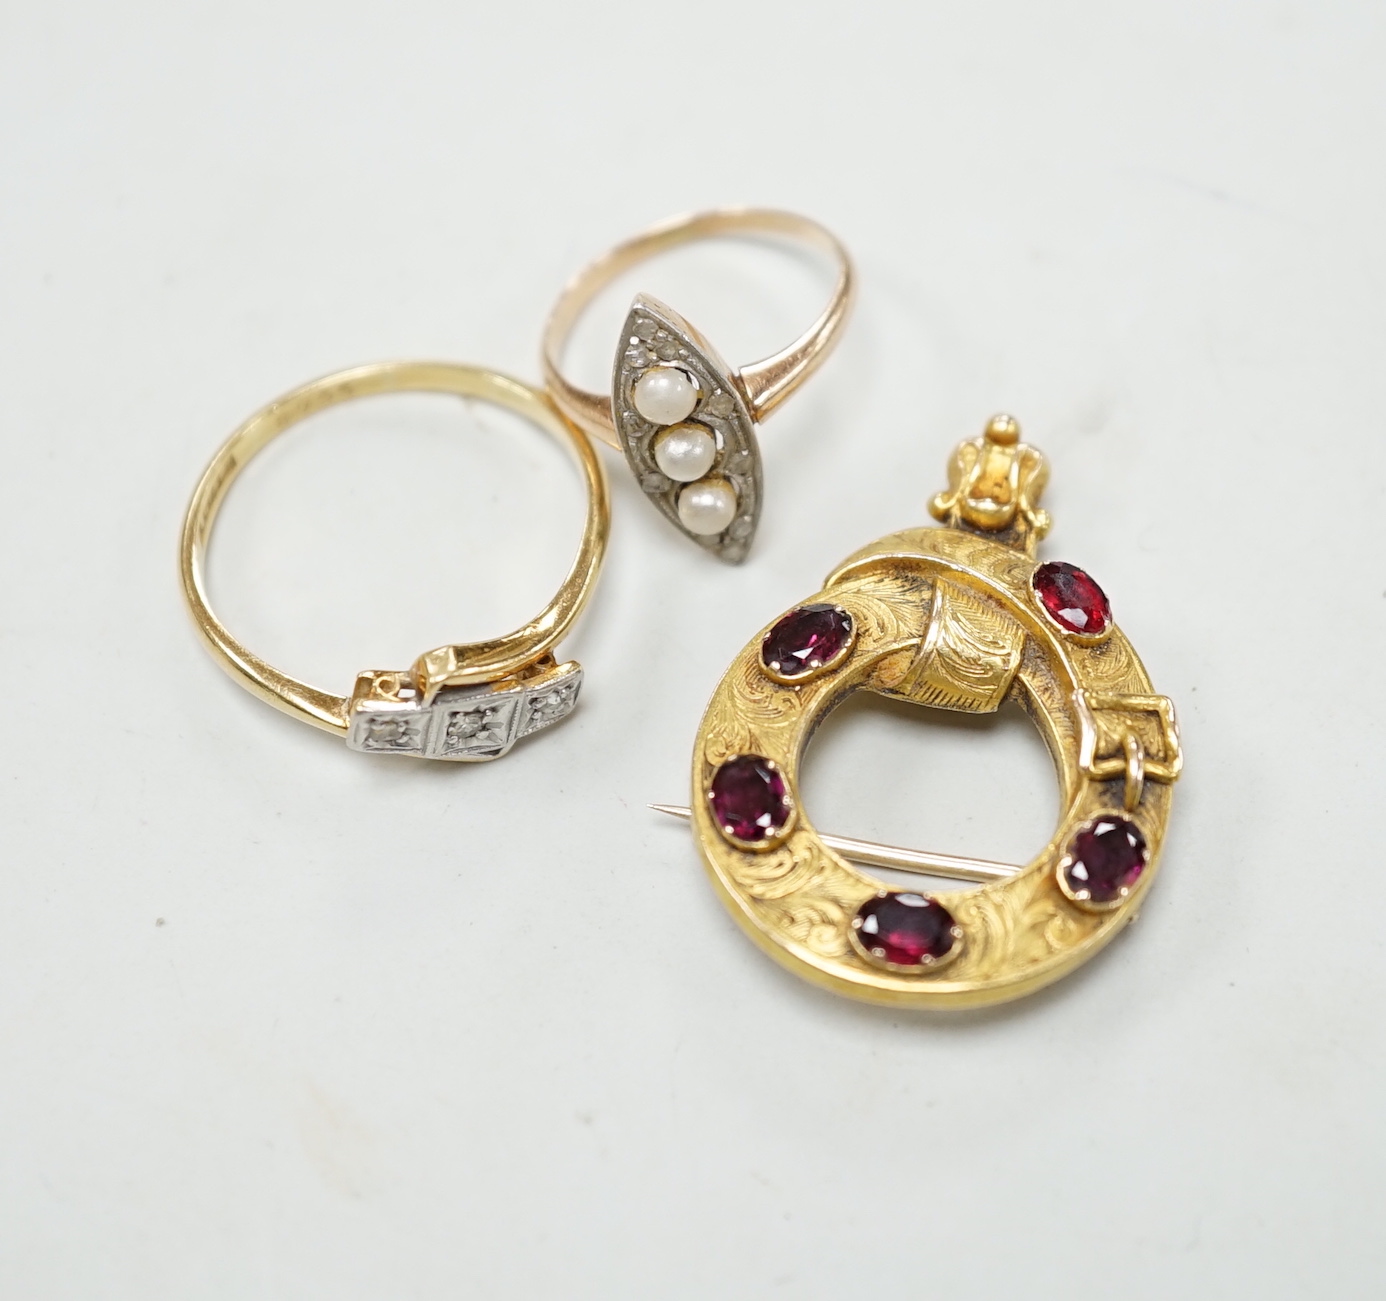 An 18c, pt and illusion set three stone diamond crossover ring, size T, a 585, three stone seed pearl and diamond chip set marquise shaped ring and a Victorian yellow metal and garnet set open work 'belt with buckle' bro